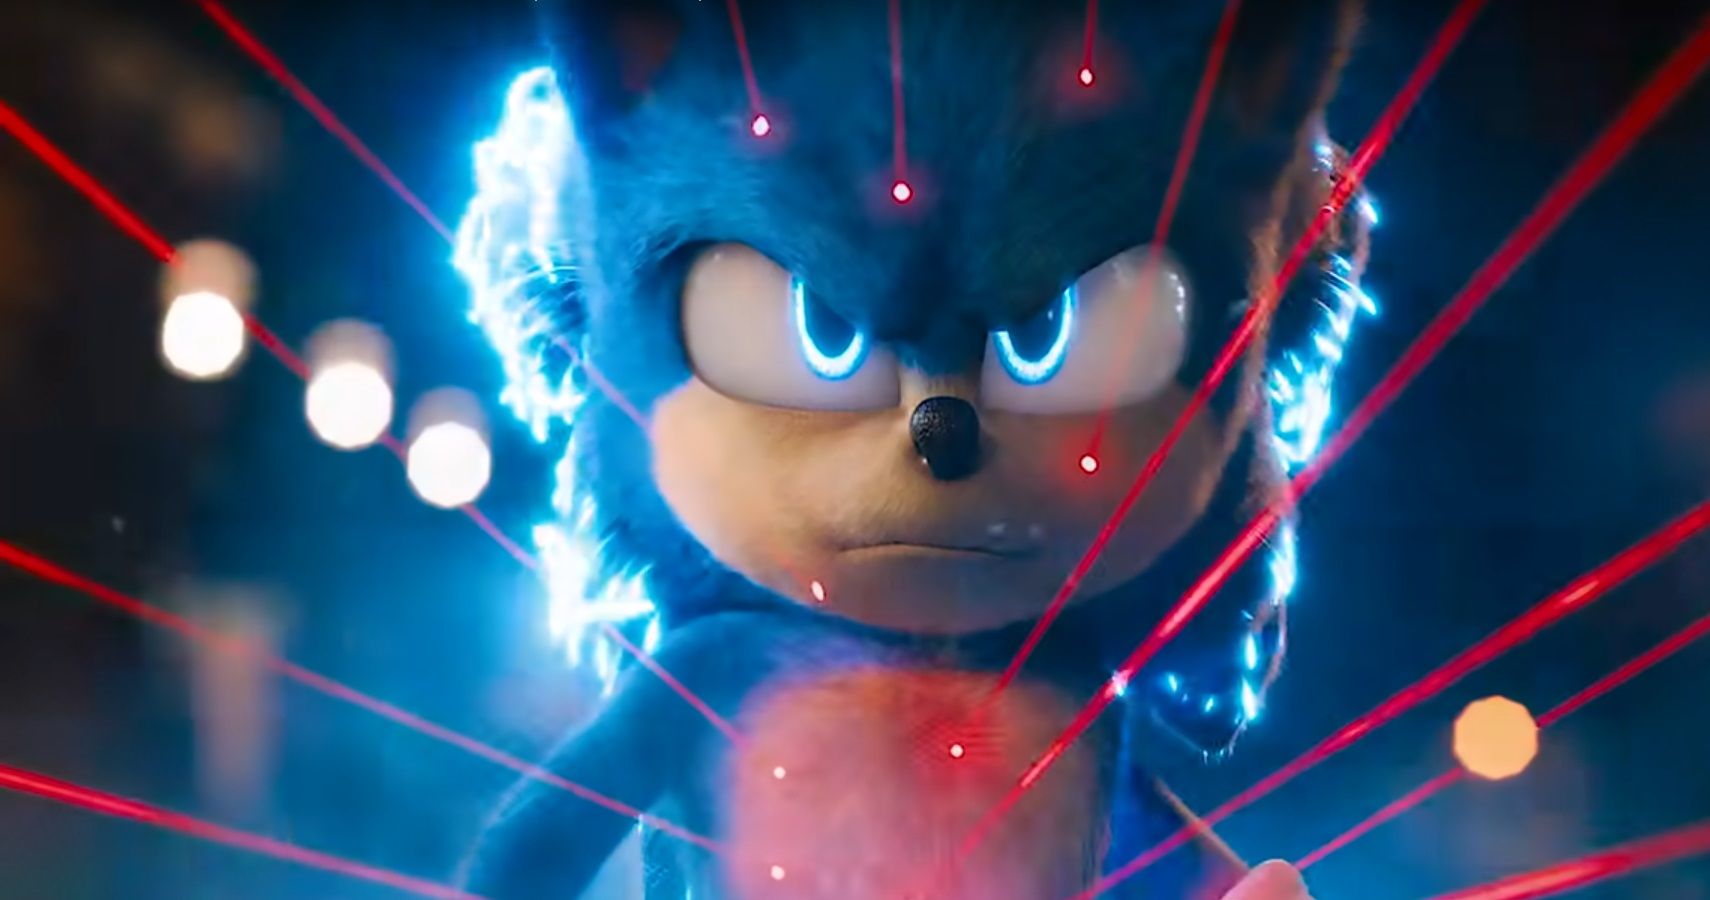 The Artist Who Led Movie Sonic's Redesign Has a Long History With the  Hedgehog